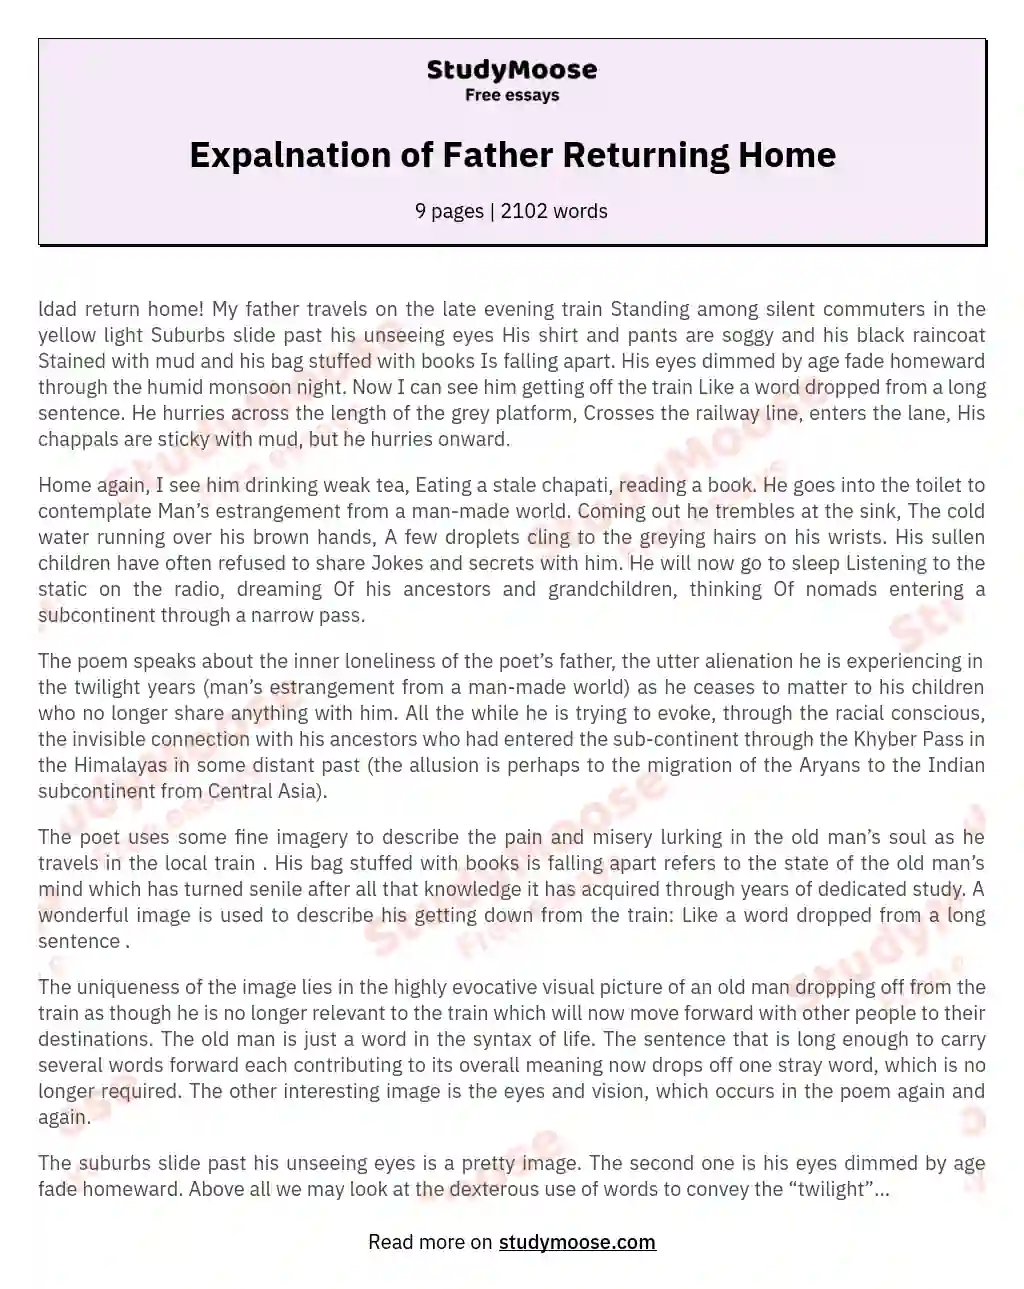 Expalnation of Father Returning Home